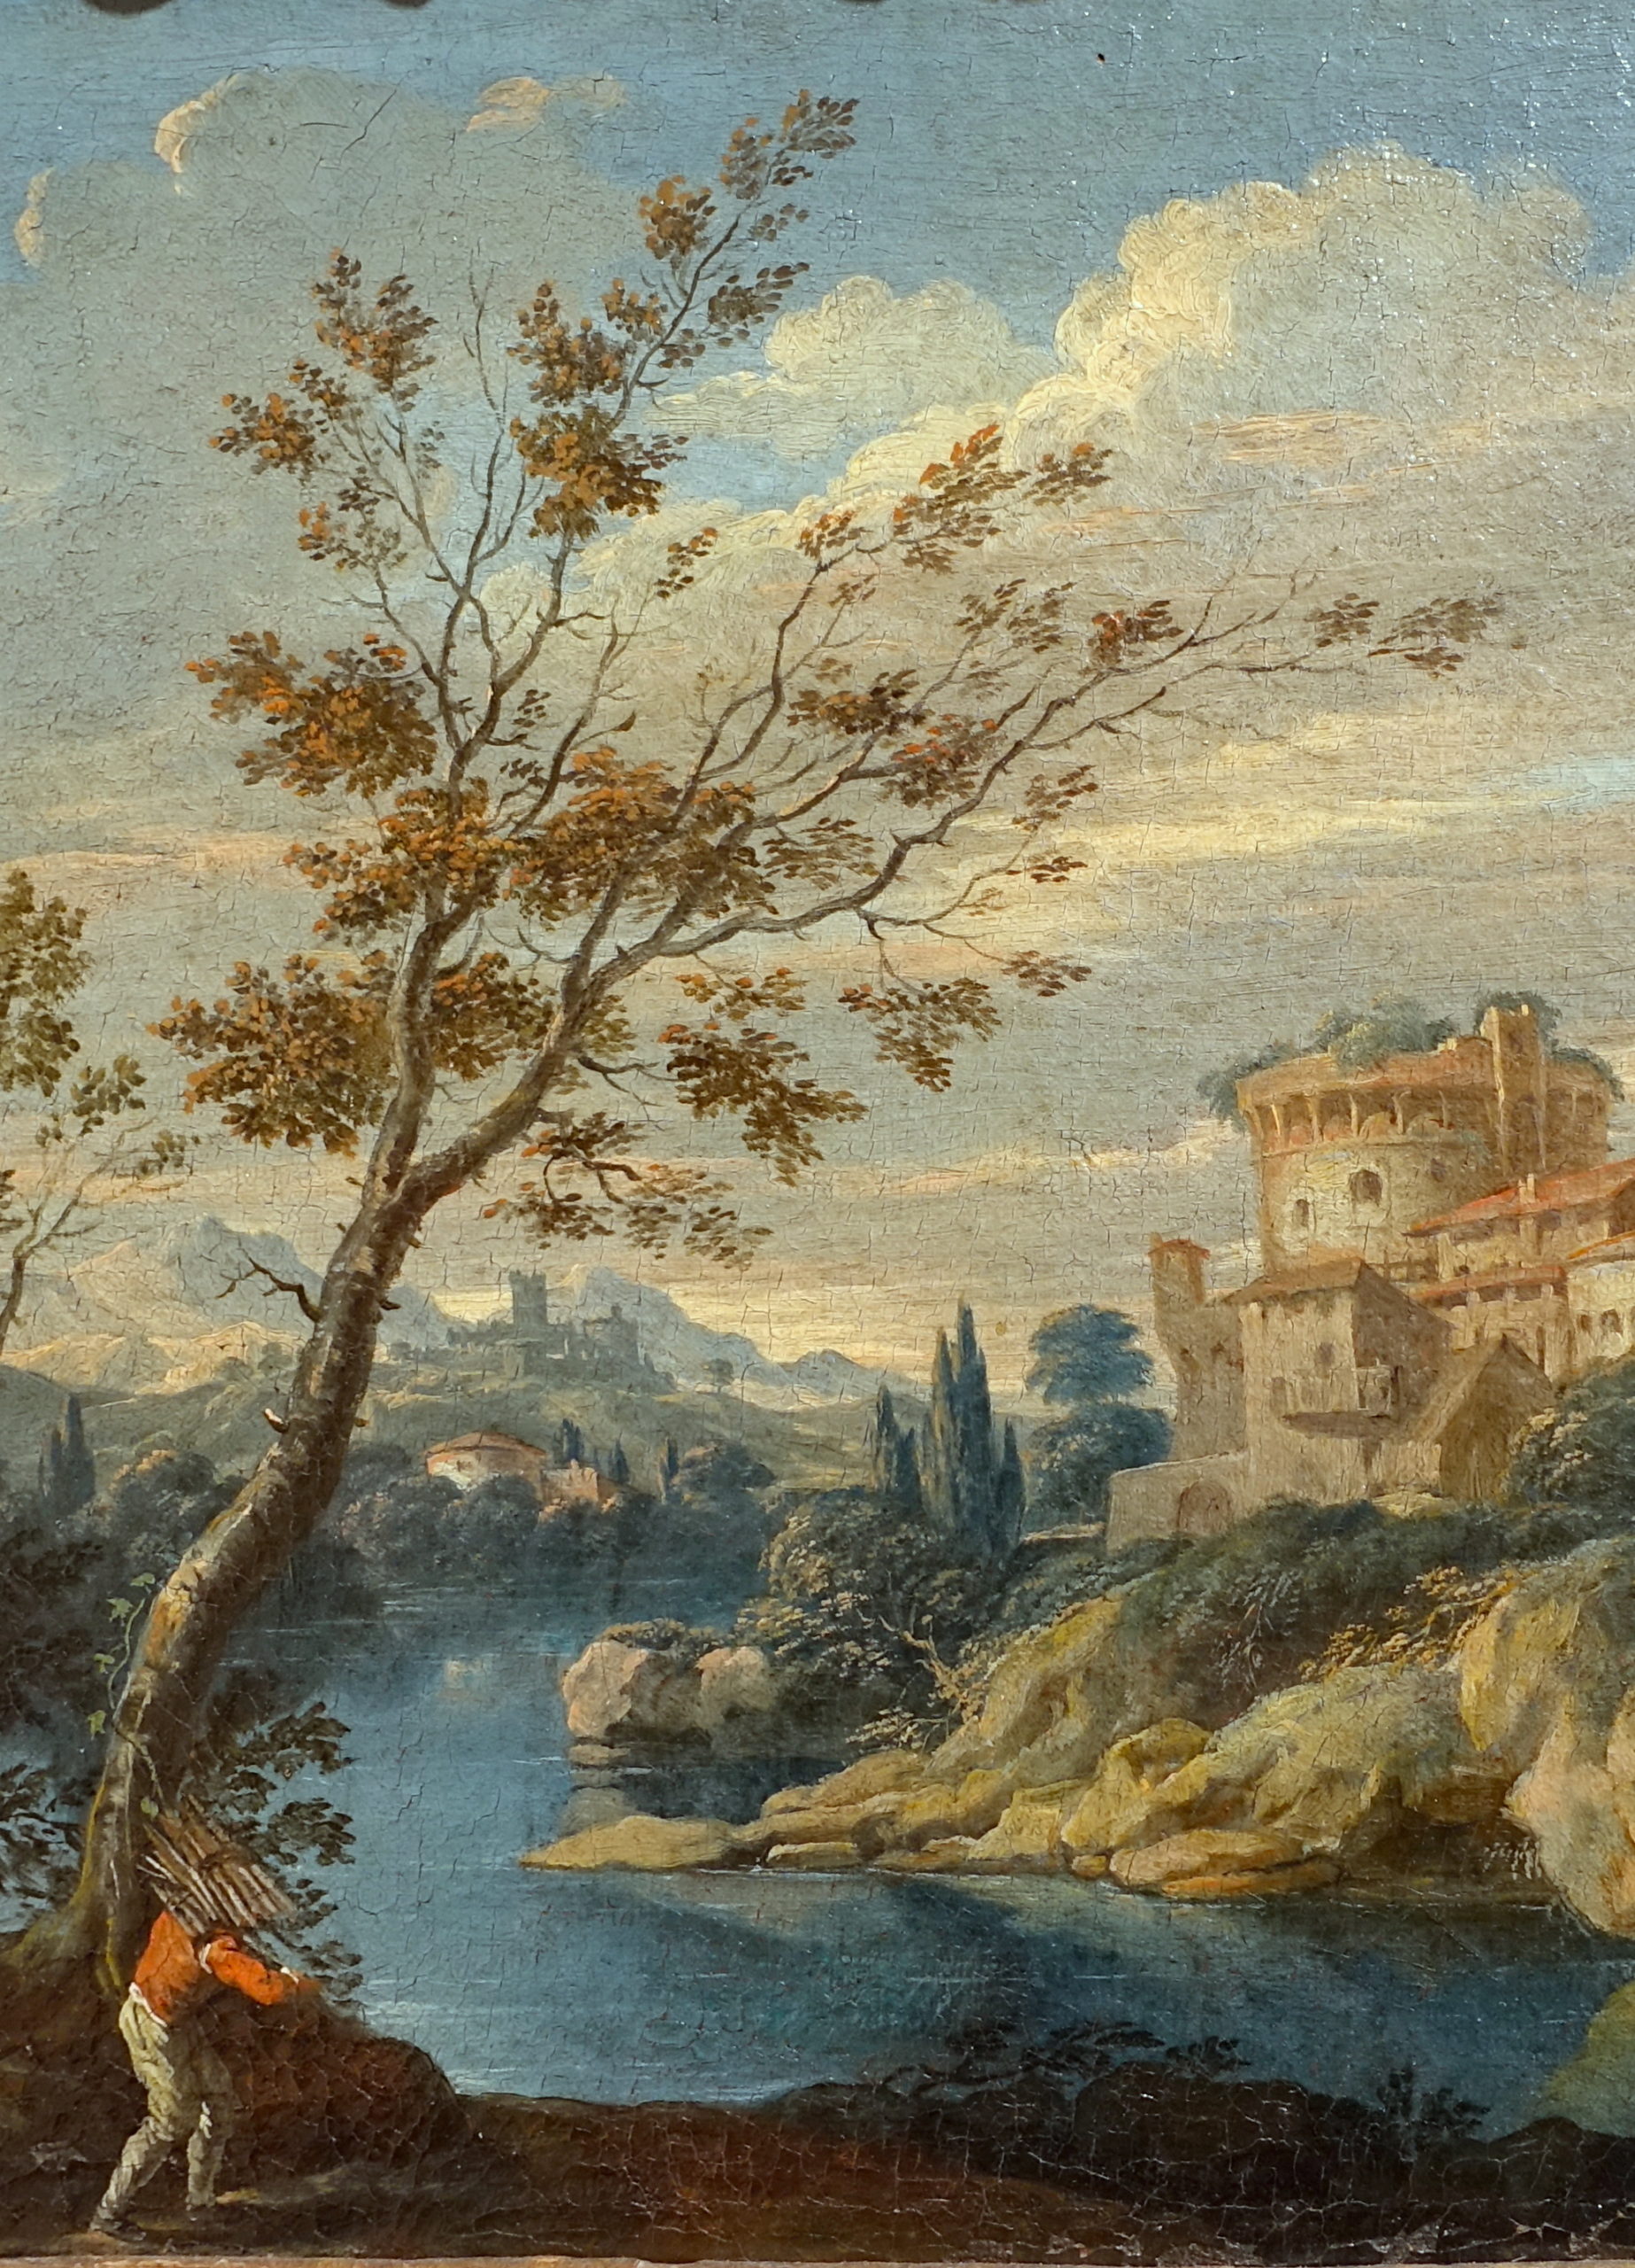 A_River_Landscape_with_a_Figure,_by_Marco_Ricci,_1710s,_oil_on_canvas_-_Blanton_Museum_of_Art_-_Austin,_Texas - 20 best laurel home blog posts 2020 - 2021